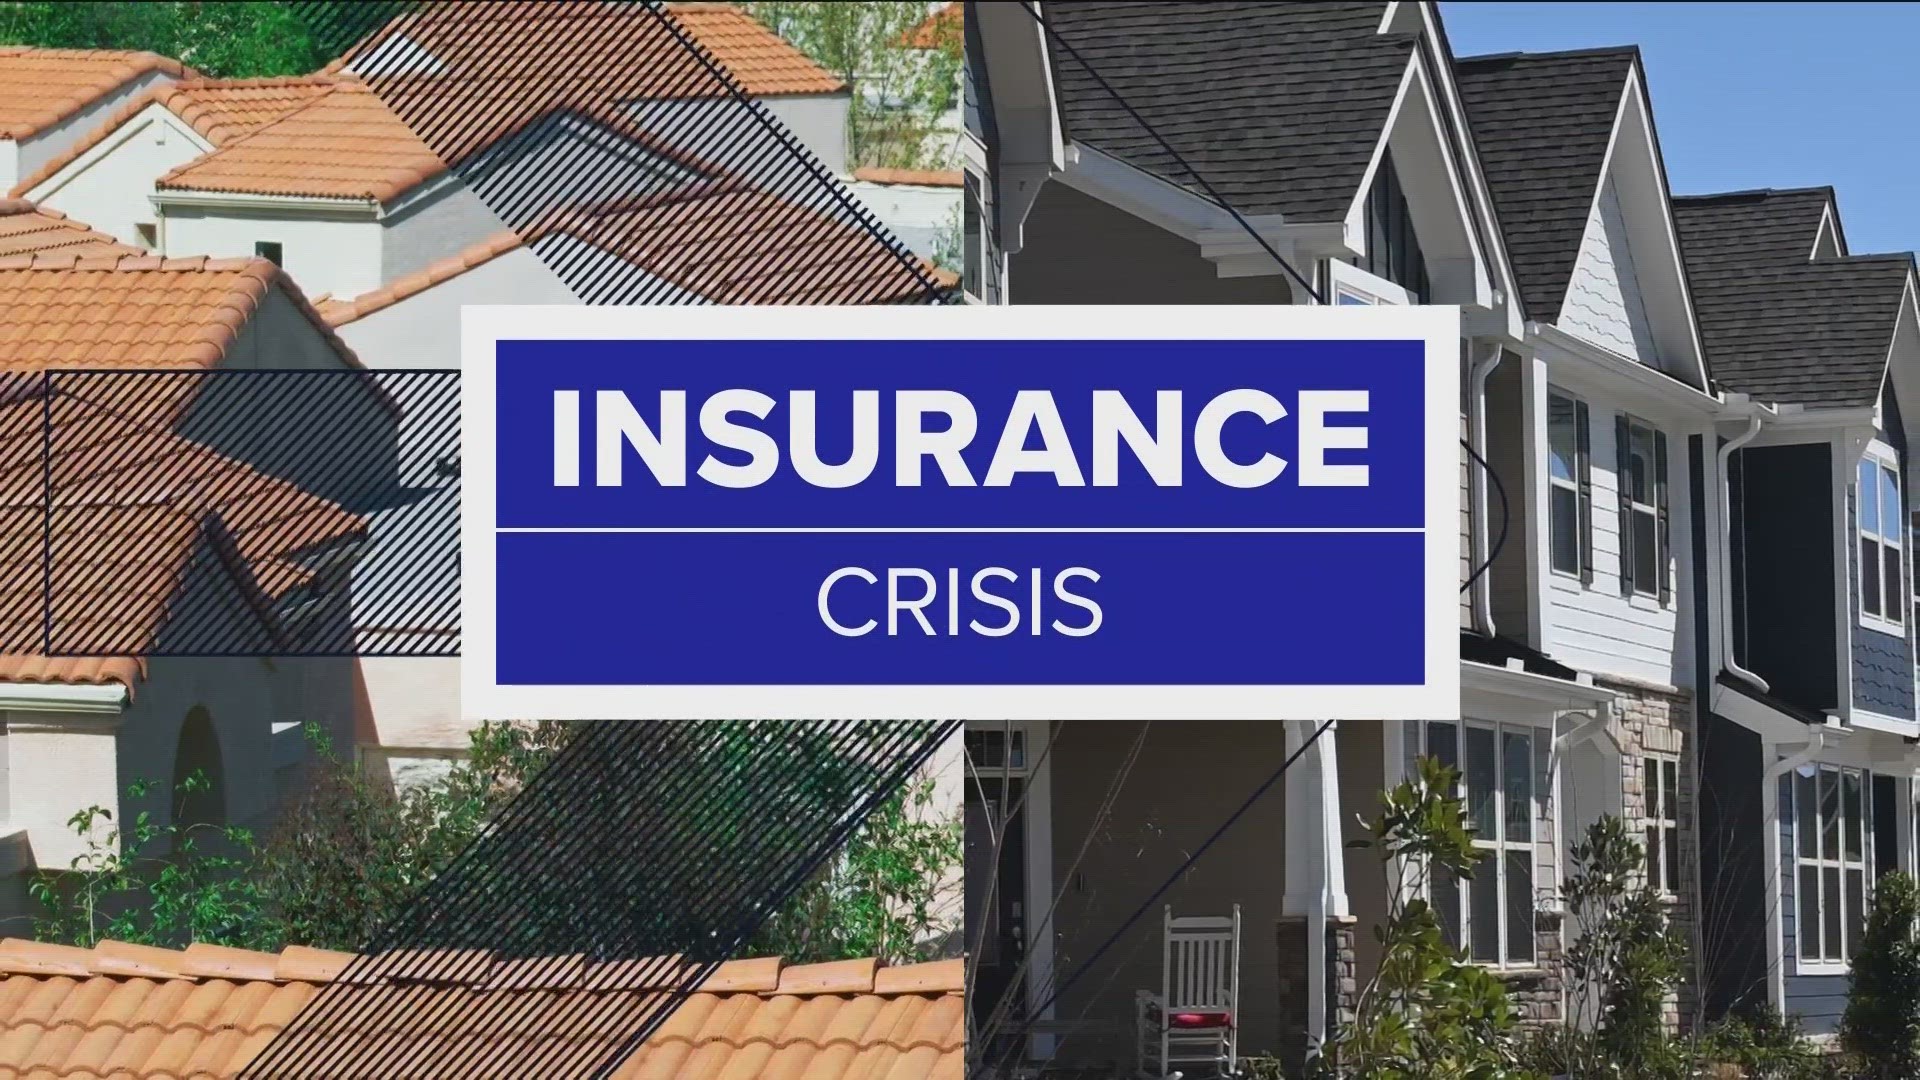 As more insurance companies leave California, experts said some escrows have been delayed or canceled.